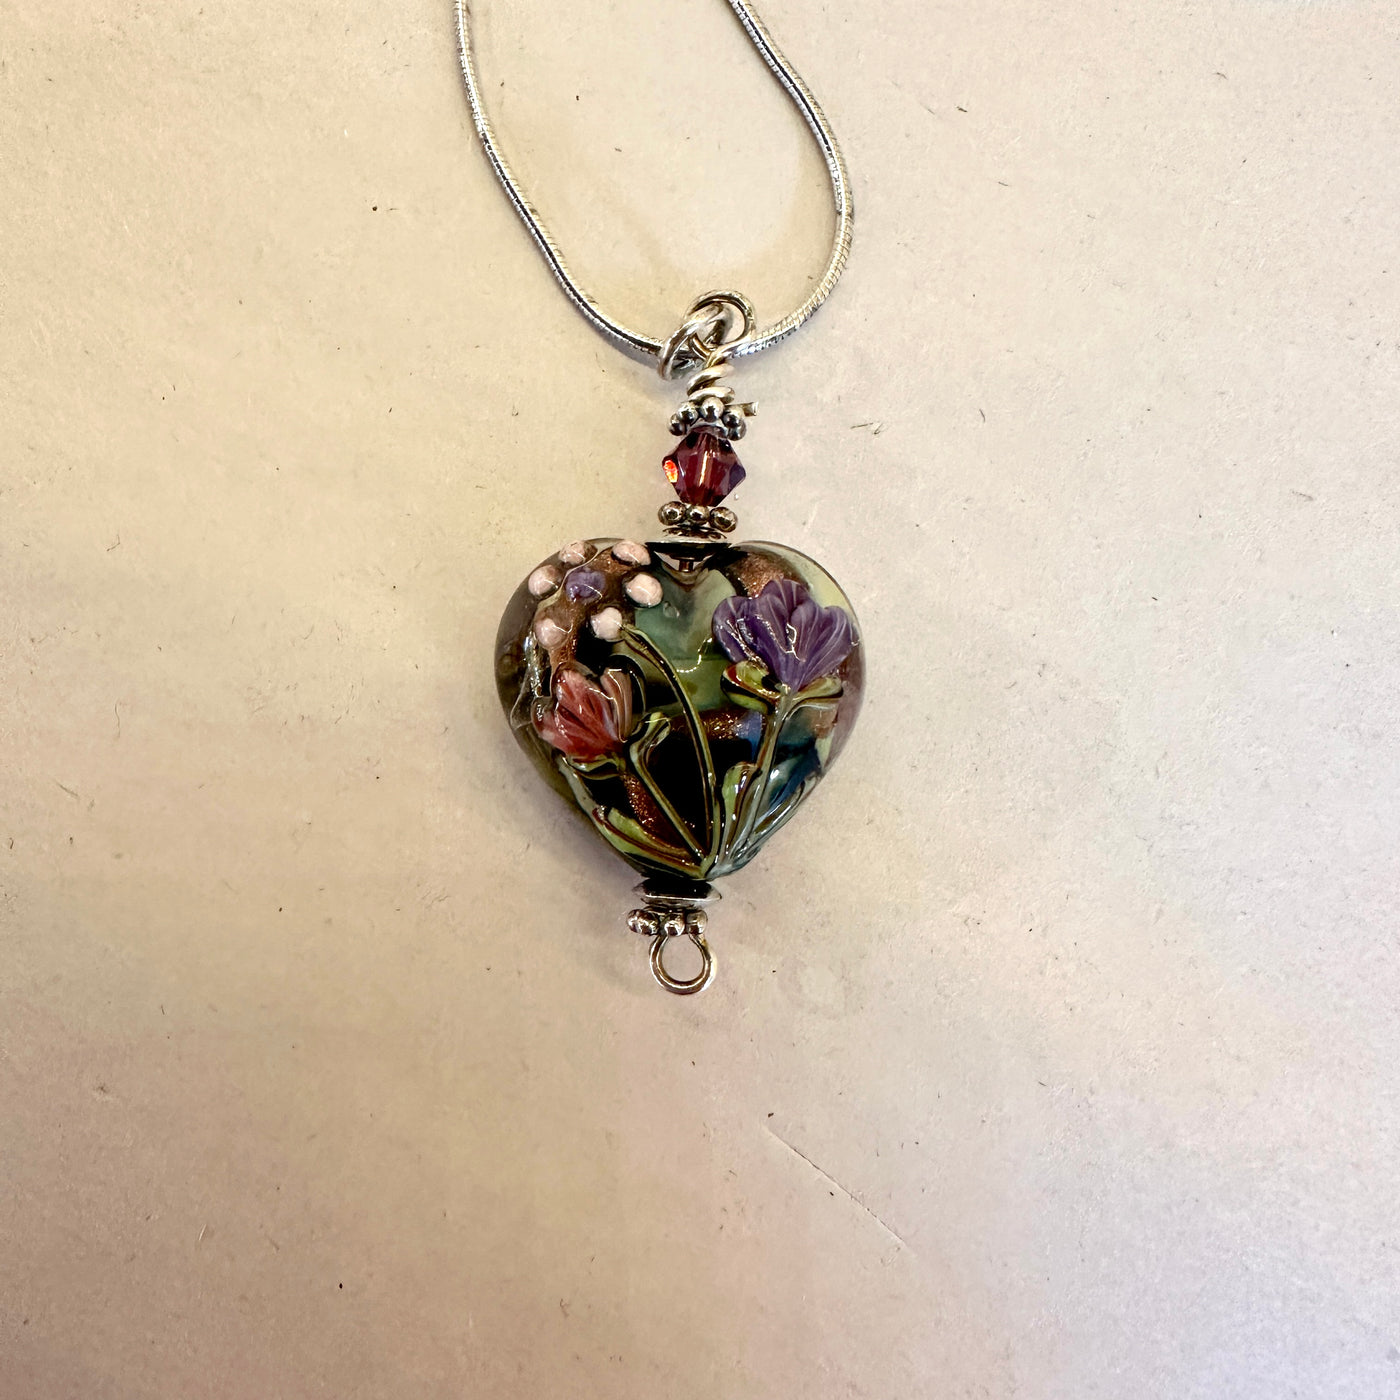 Handcrafted Heart Shaped Glass Pendant